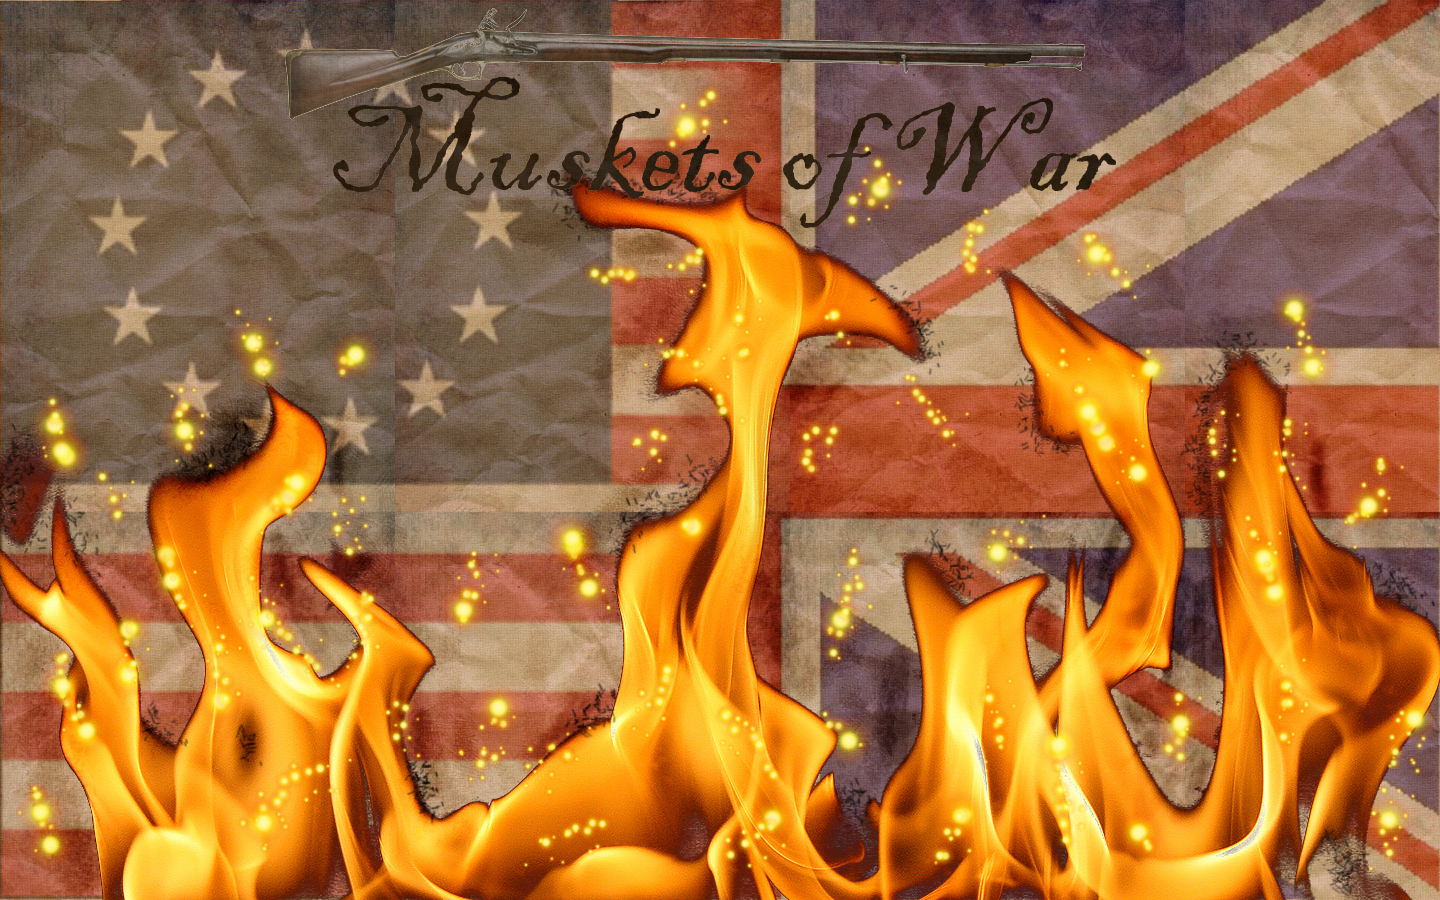 New Background For Mow Image Muskets Of War An American Revolution